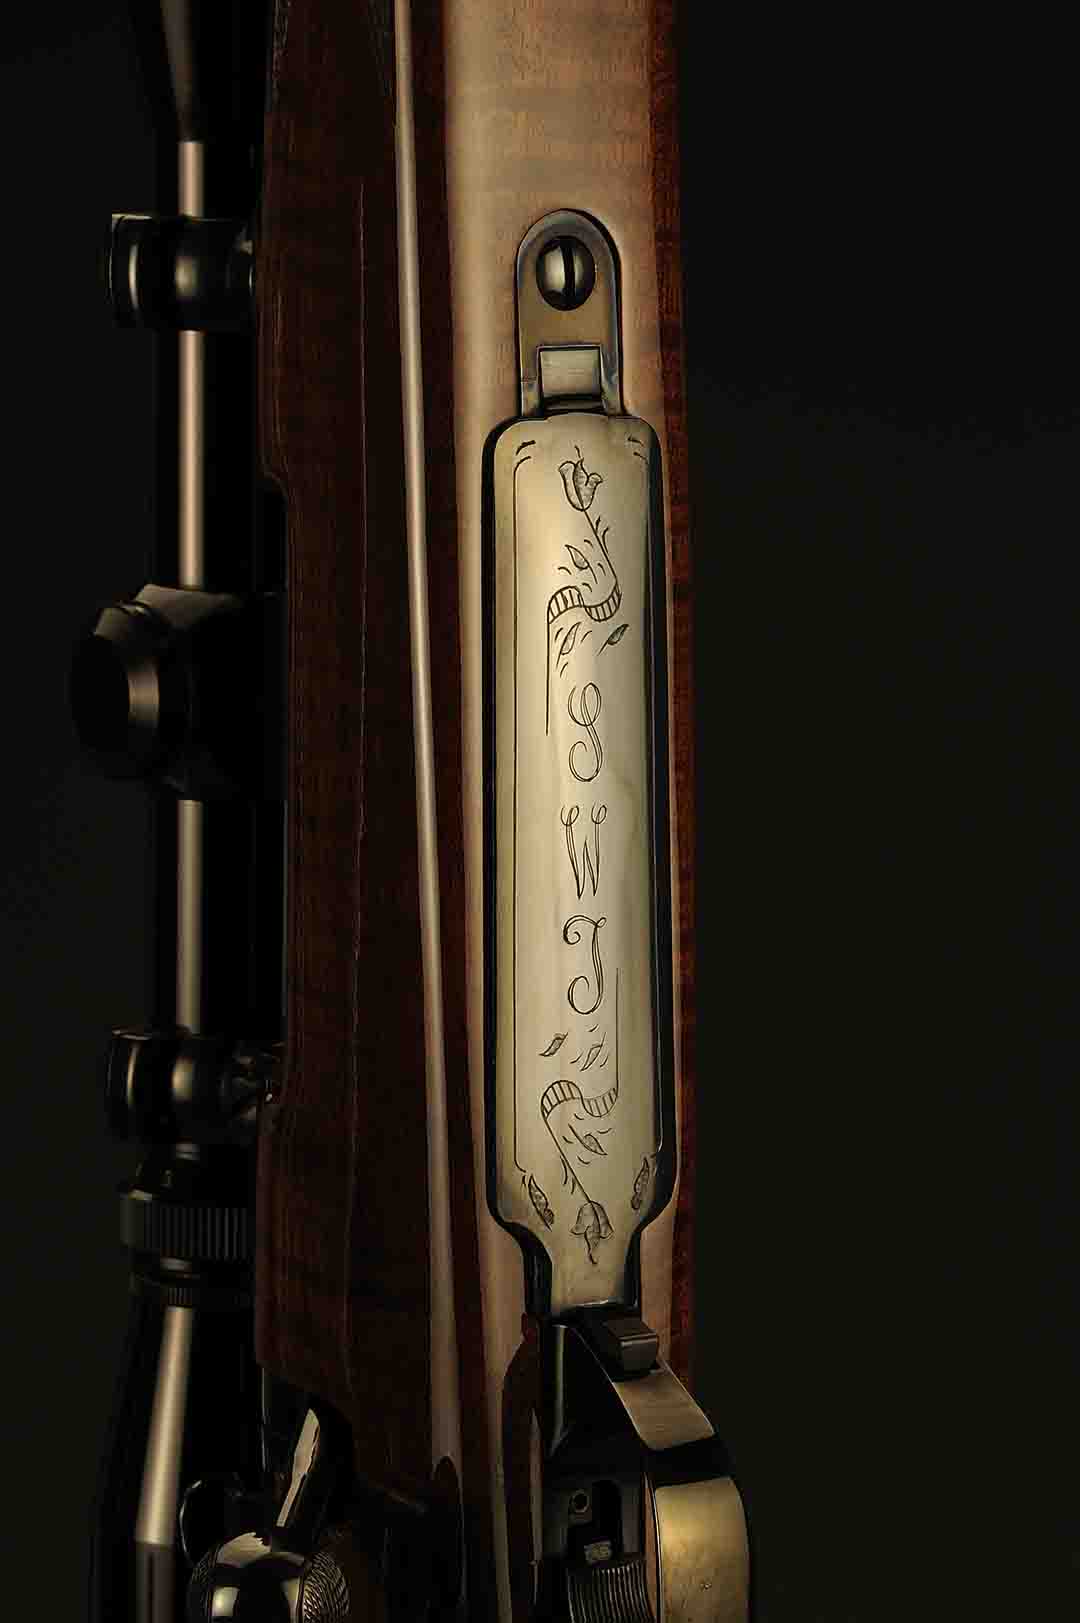 To personalize his rifle, Stan had Weatherby engrave his initials on the floorplate. Like the rest of the metalwork on the gun, it has a high polish and bluing.